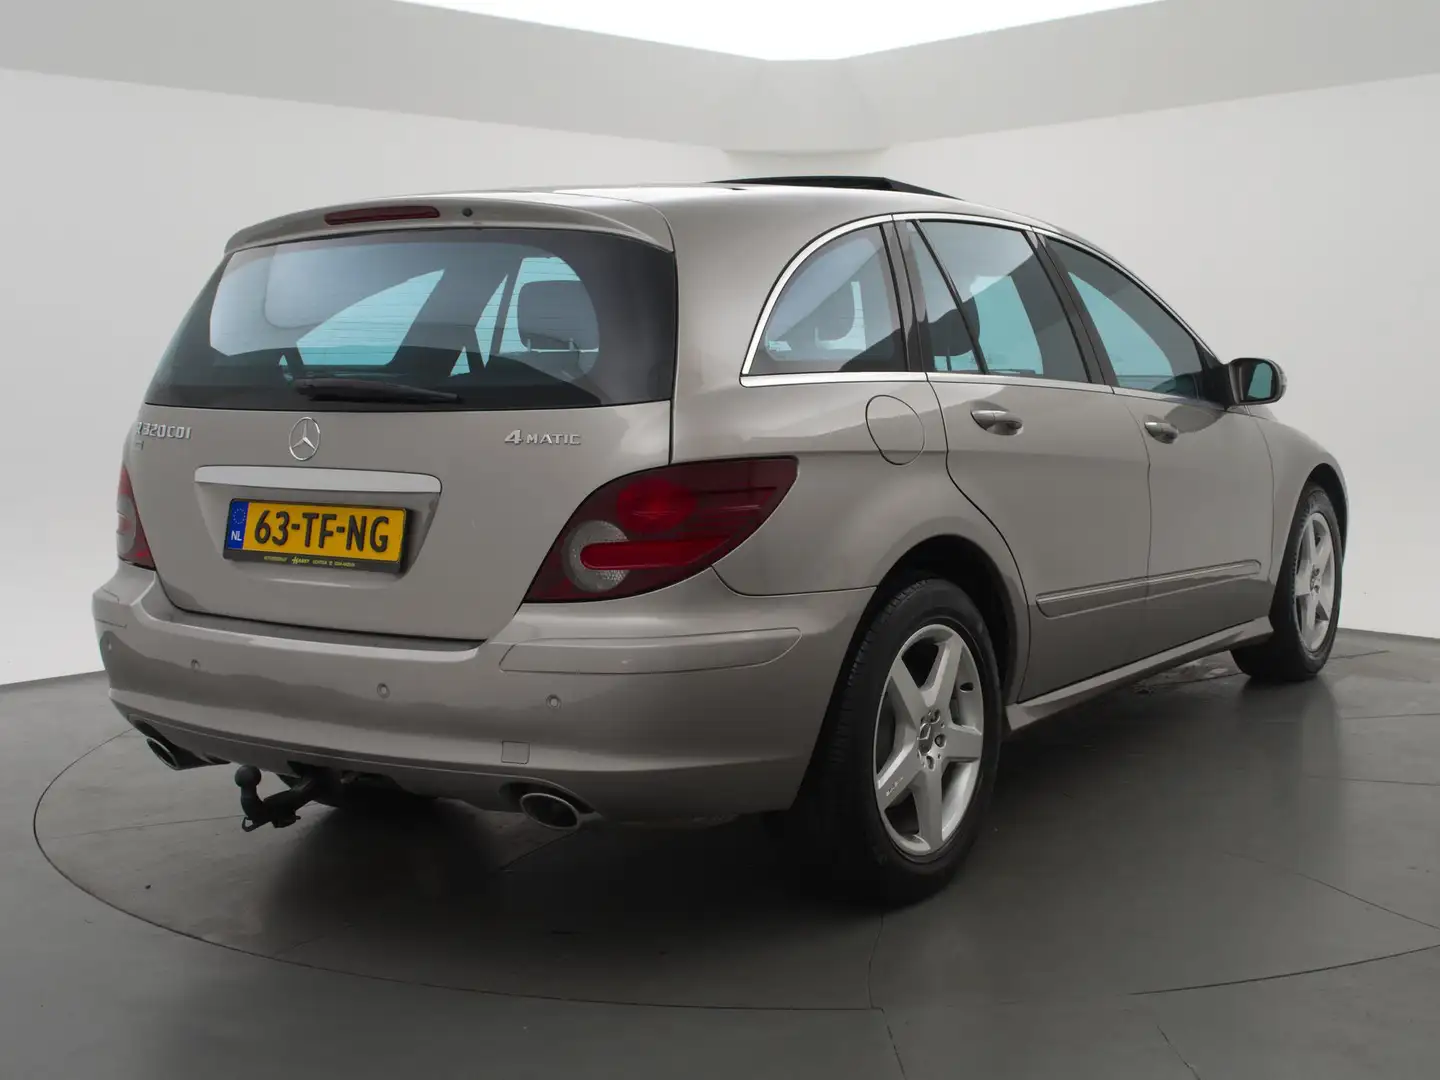 Mercedes-Benz R 320 CDI 4-MATIC 6-PERS. *184.762 KM* YOUNGTIMER siva - 2